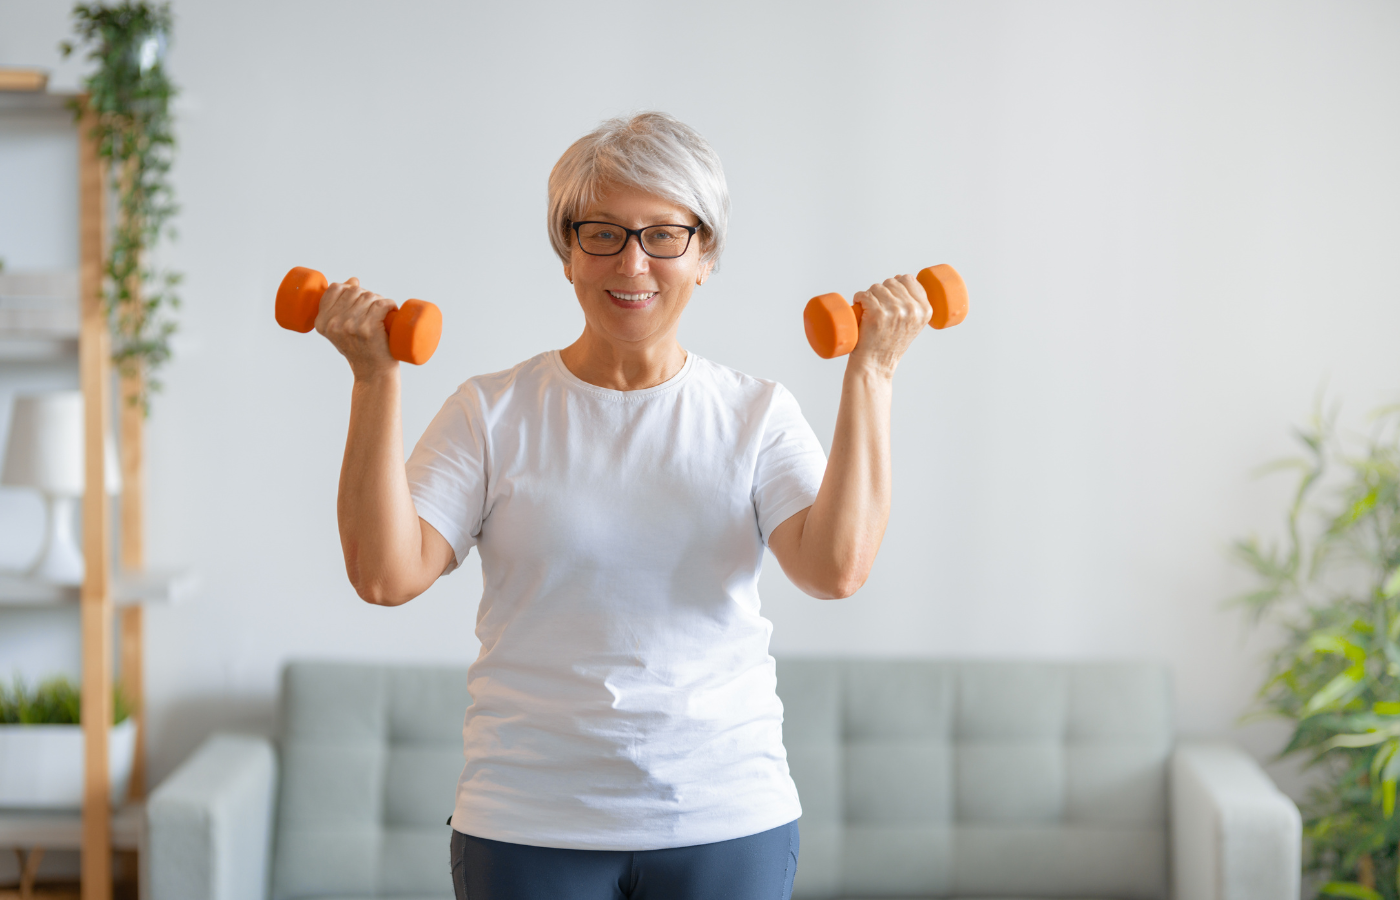 An elderly woman working out with vinyl-dipped dumbbells